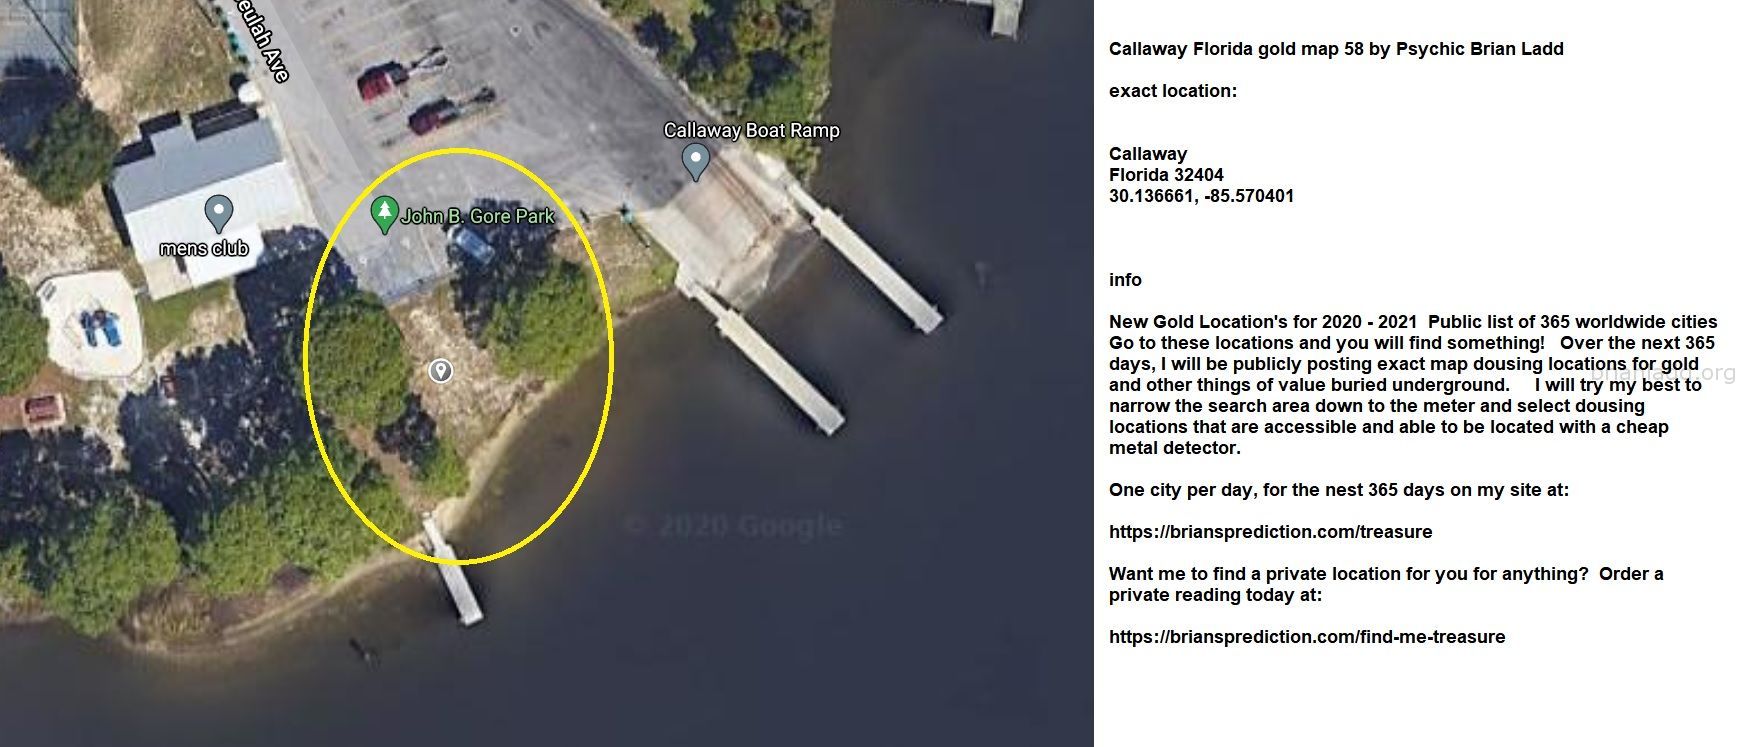 Callaway Florida Gold Map 58 By Psychic Brian Ladd - Callaway Florida Gold Map 58 By Psychic Brian Ladd  Exact Location:...
Callaway Florida Gold Map 58 By Psychic Brian Ladd  Exact Location:  Callaway  Florida 32404  30.136661, -85.570401  Info  New Gold Location'S For 2020 - 2021  Public List Of 365 Worldwide Cities  Go To These Locations And You Will Find Something!  Over The Next 365 Days, I Will Be Publicly Posting Exact Map Dousing Locations For Gold And Other Things Of Value Buried Underground.  I Will Try My Best To Narrow The Search Area Down To The Meter And Select Dousing Locations That Are Accessible And Able To Be Located With A Cheap Metal Detector.  One City Per Day, For The Nest 365 Days On My Site At:   https://briansprediction.com/Treasure  Want Me To Find A Private Location For You For Anything?  Order A Private Reading Today At:   https://briansprediction.com/Find-Me-Treasure
